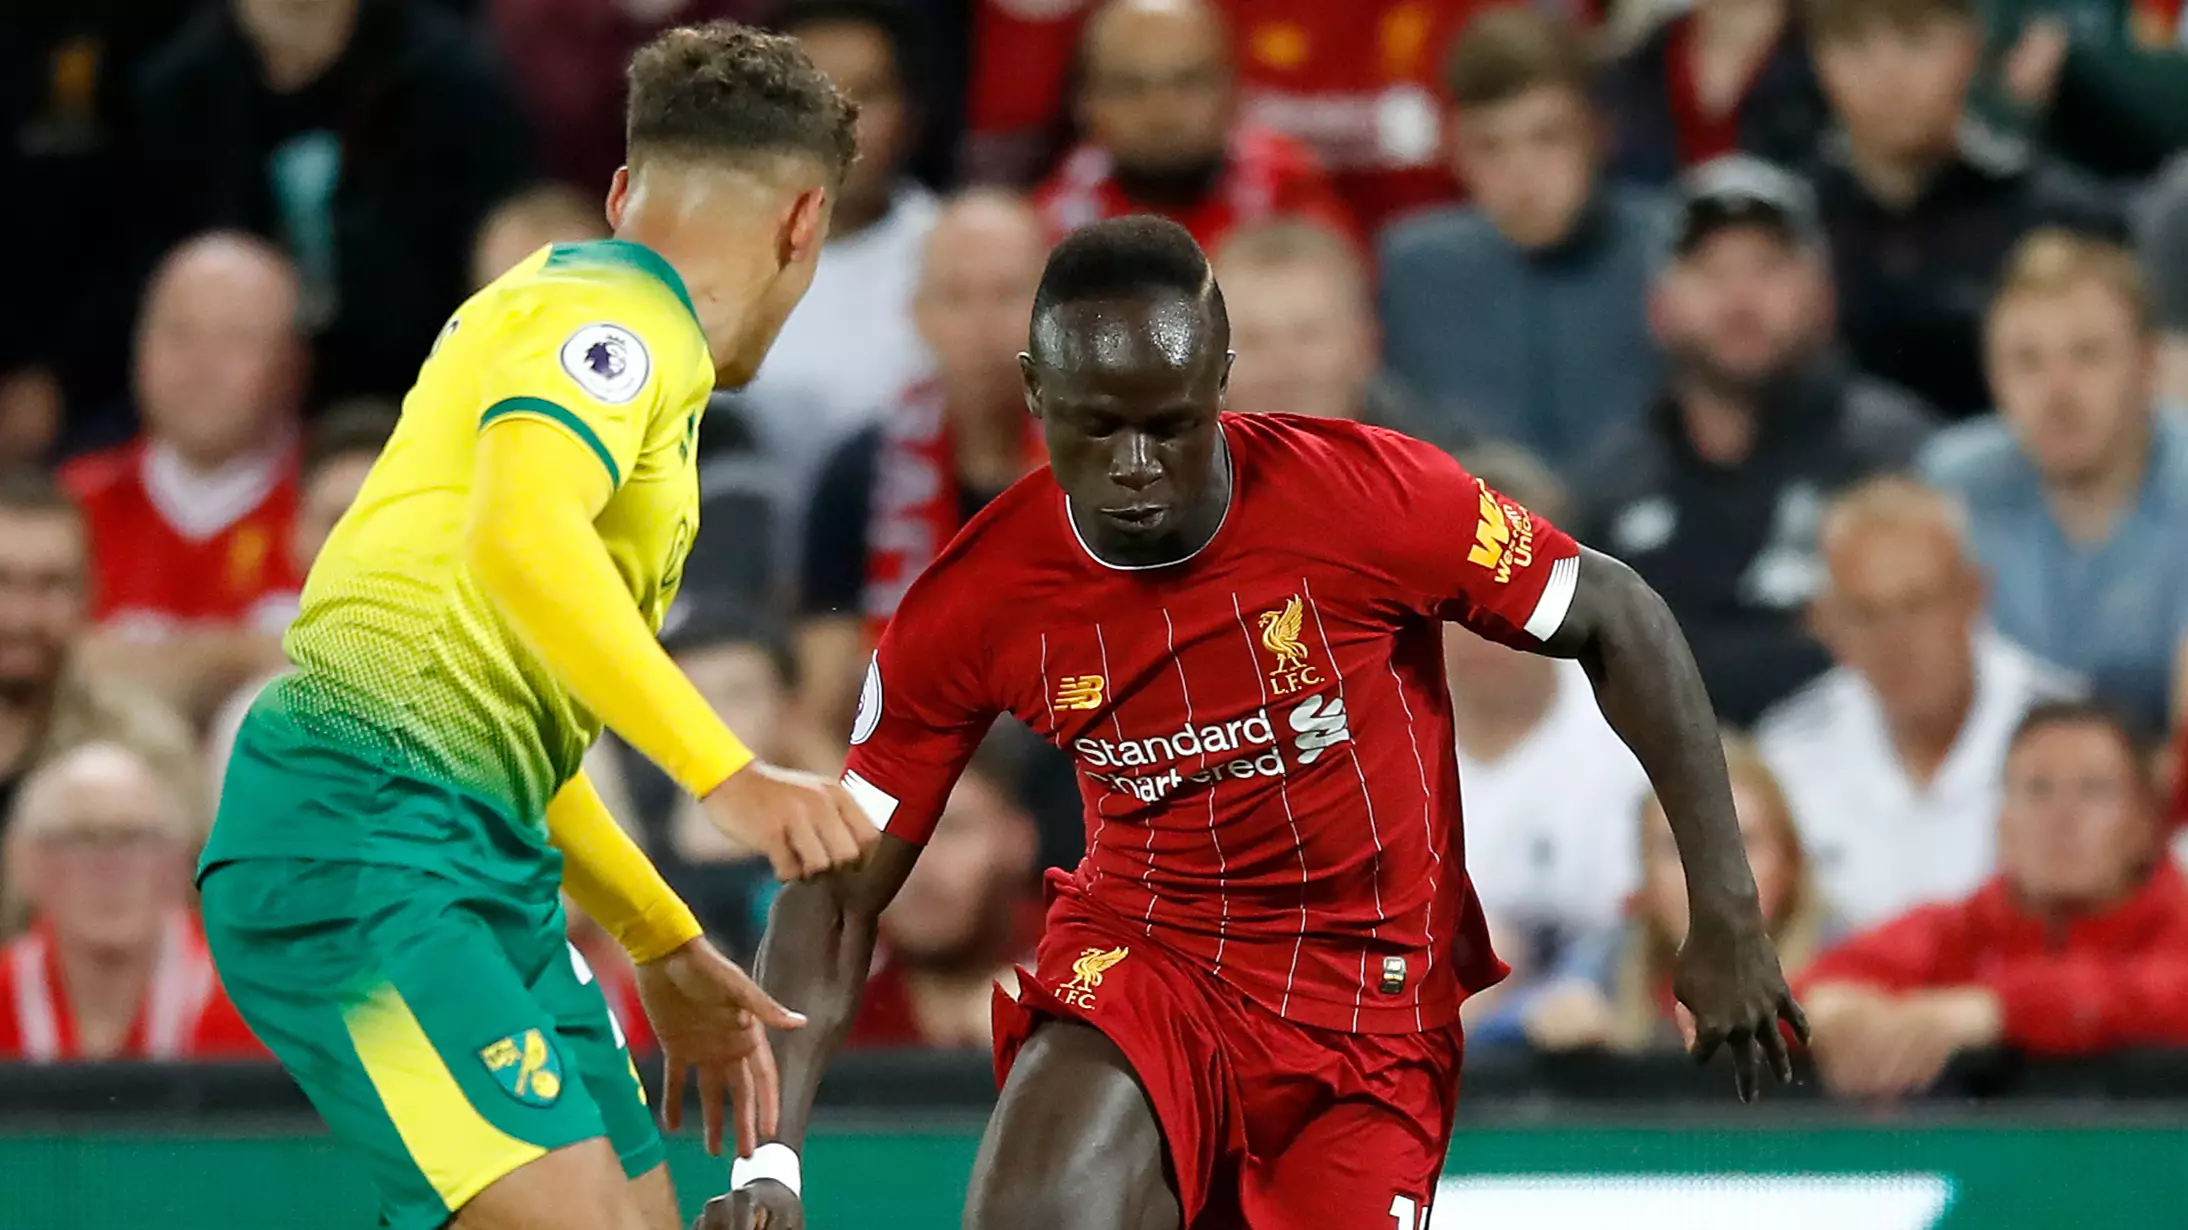 Liverpool Vs Chelsea Team News: Sadio Mane Starts, Olivier Giroud And Christian Pulisic Up Front For Blues